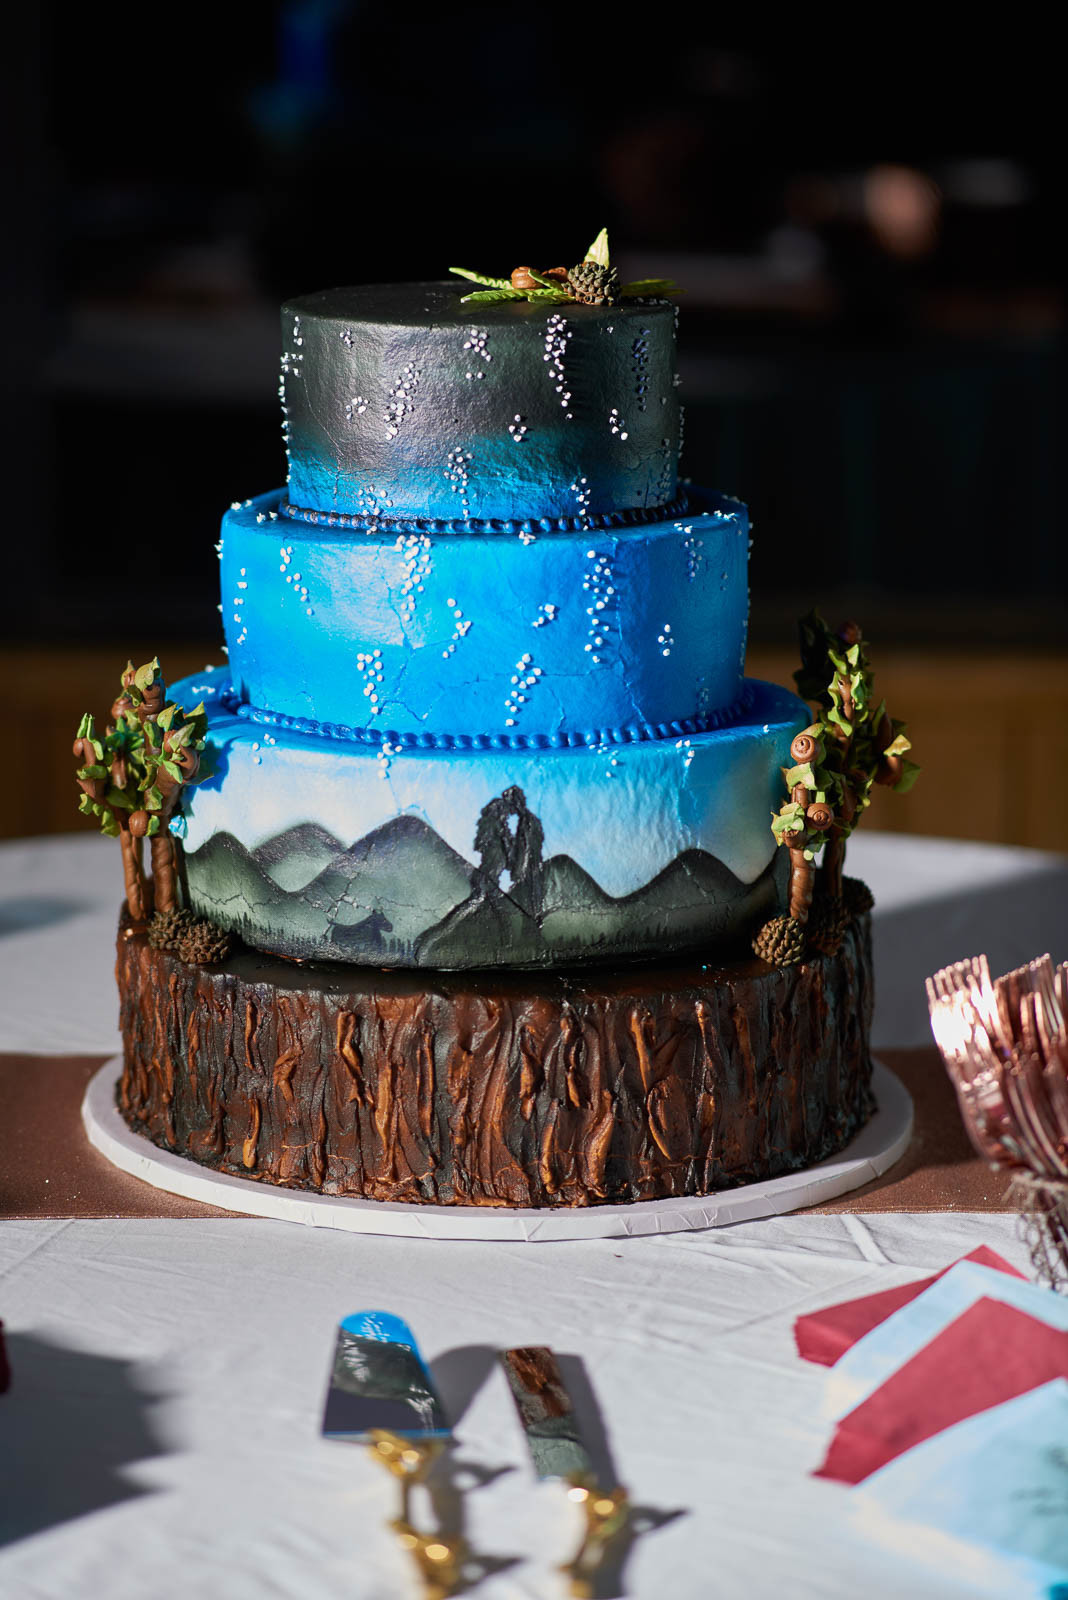 DIY Wedding Cakes
 Exceptional DIY Wedding Cakes highlighting some of our